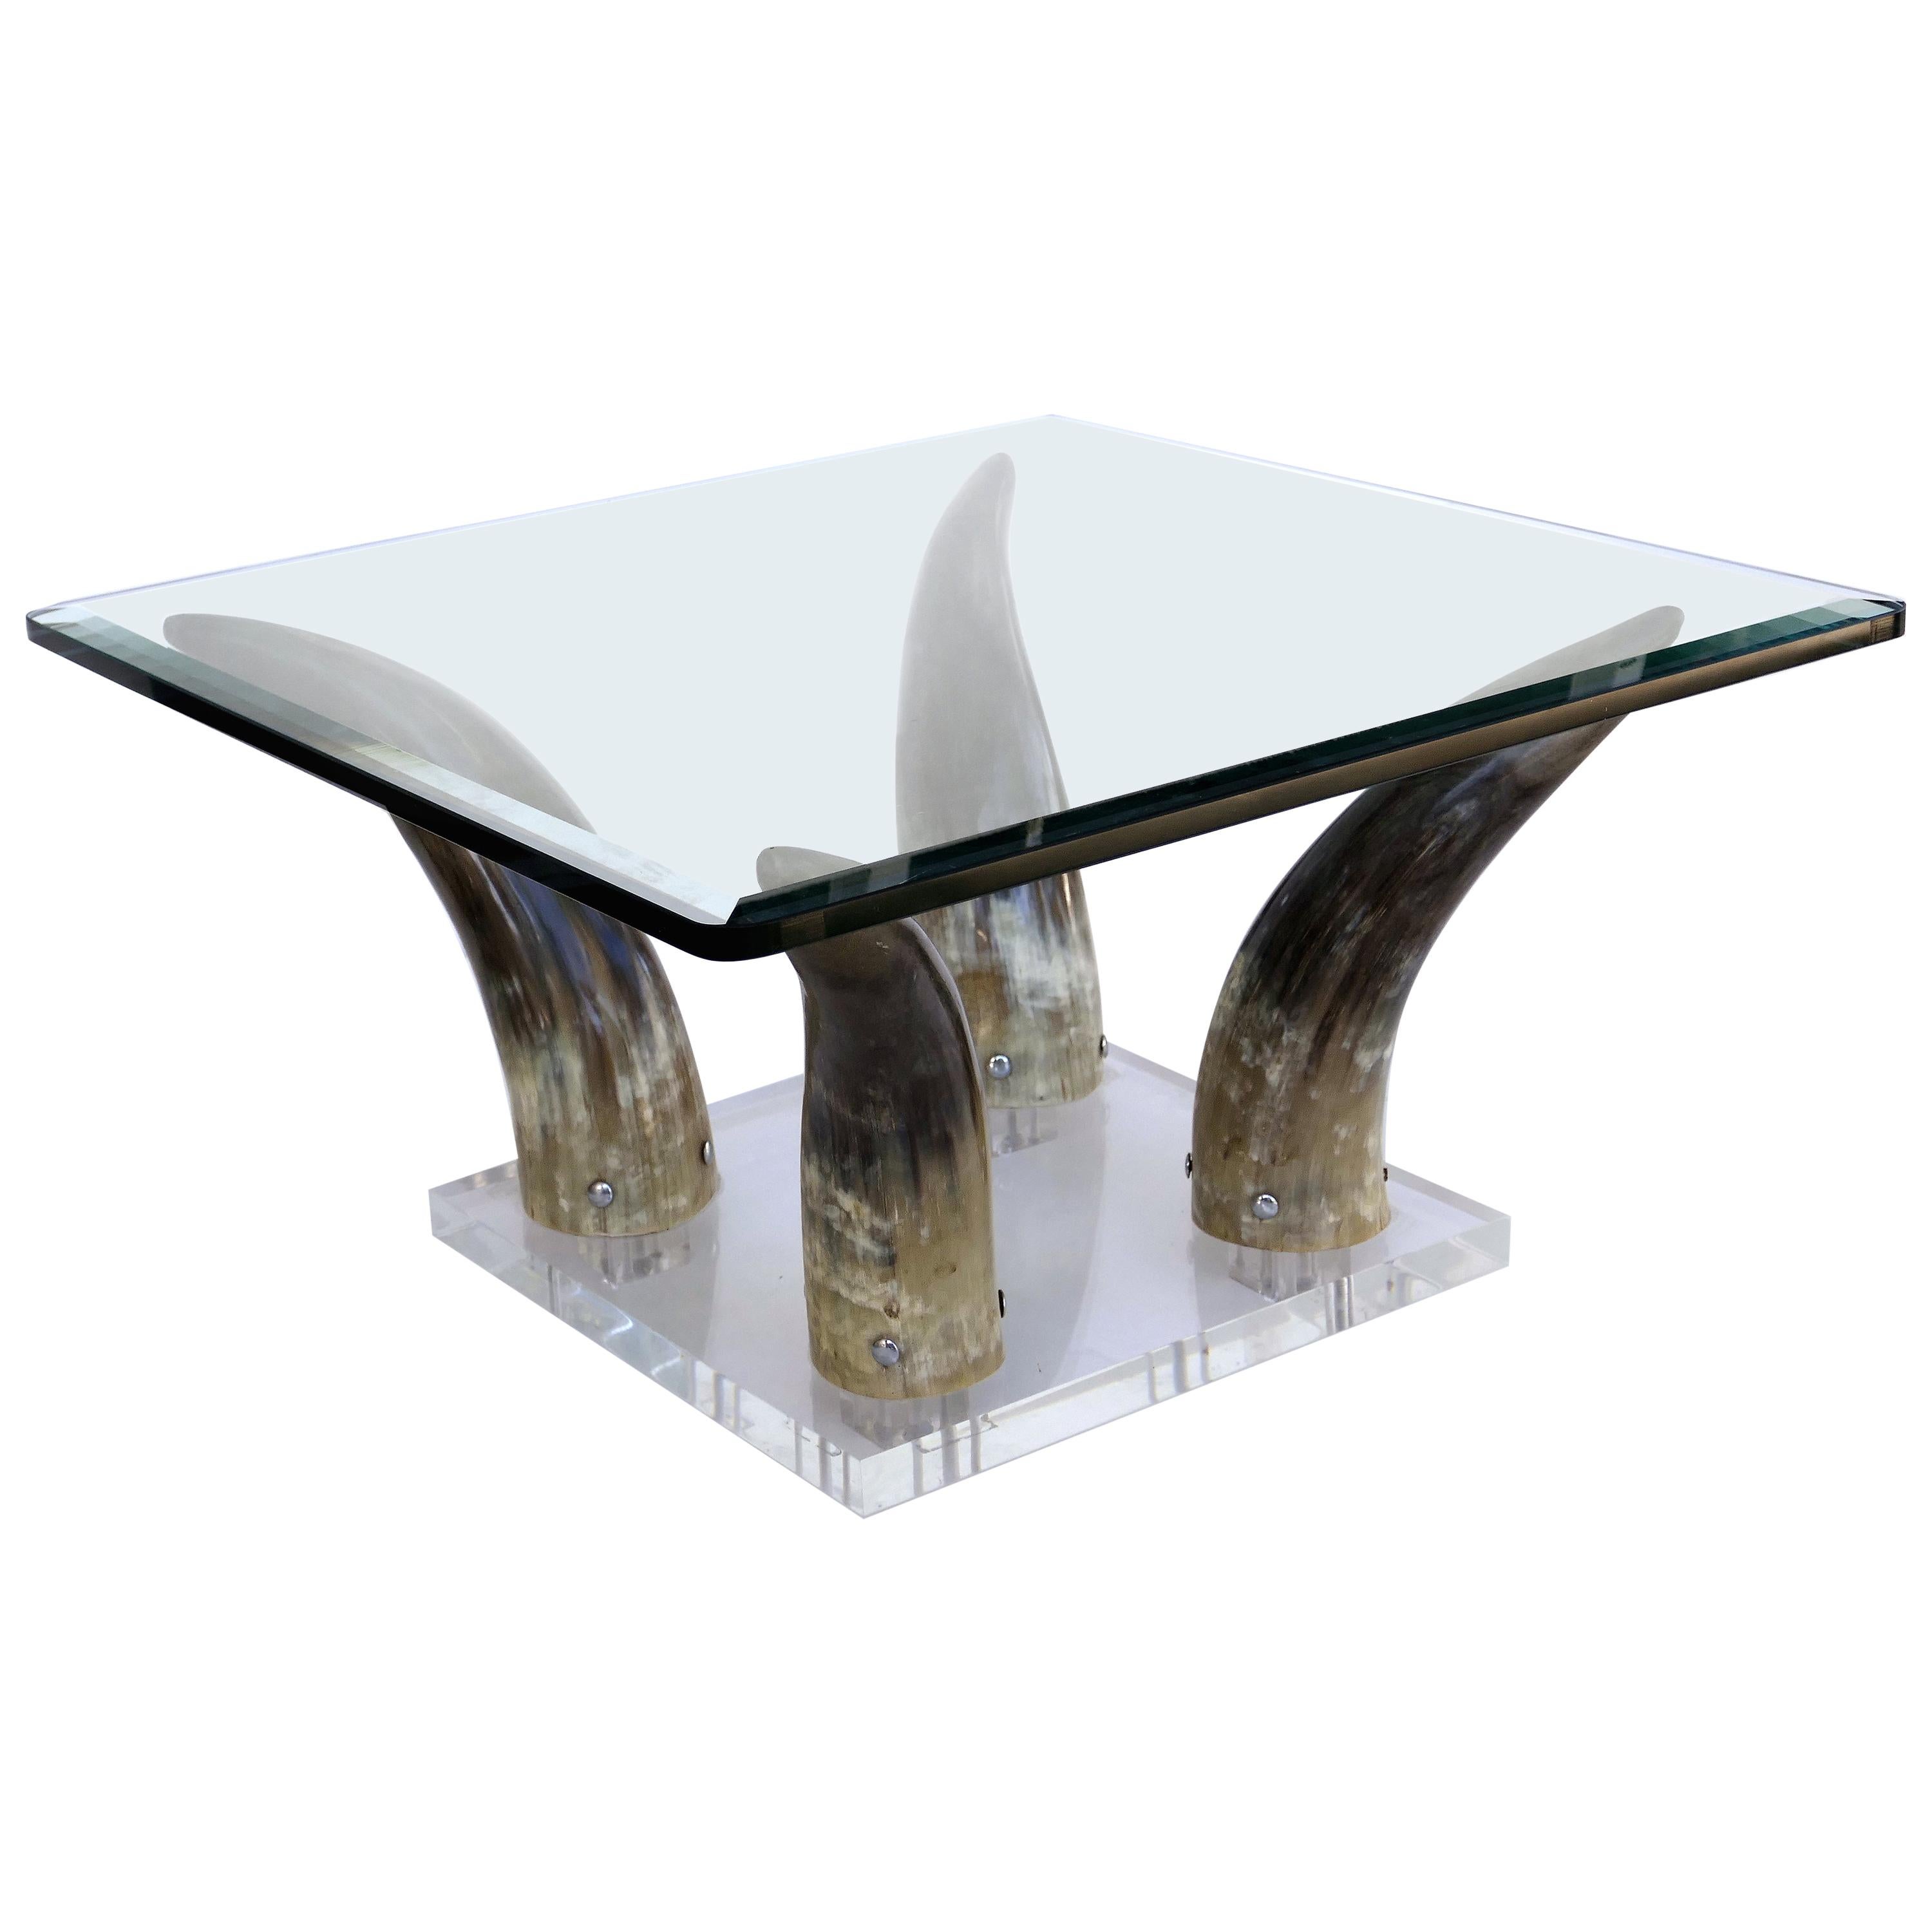 Horn and Lucite Coffee Table or Low Side Table with Glass Top